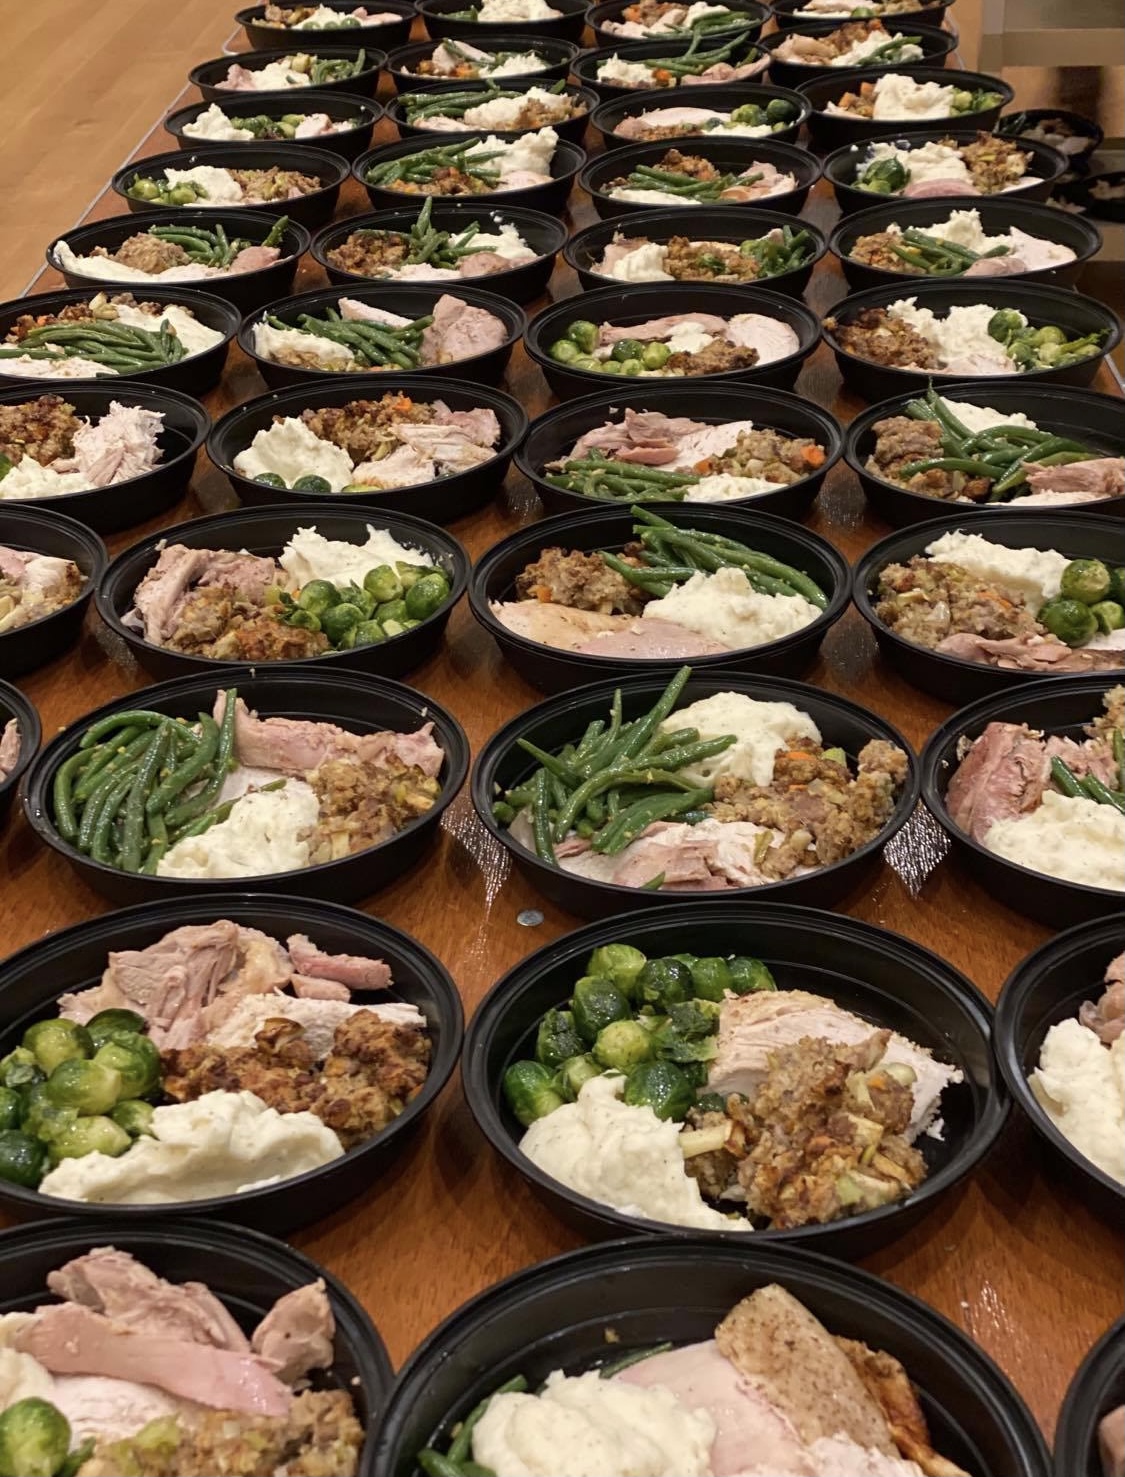 Tasty Thanksgiving meals made and distributed by Citizens 4 Humanity